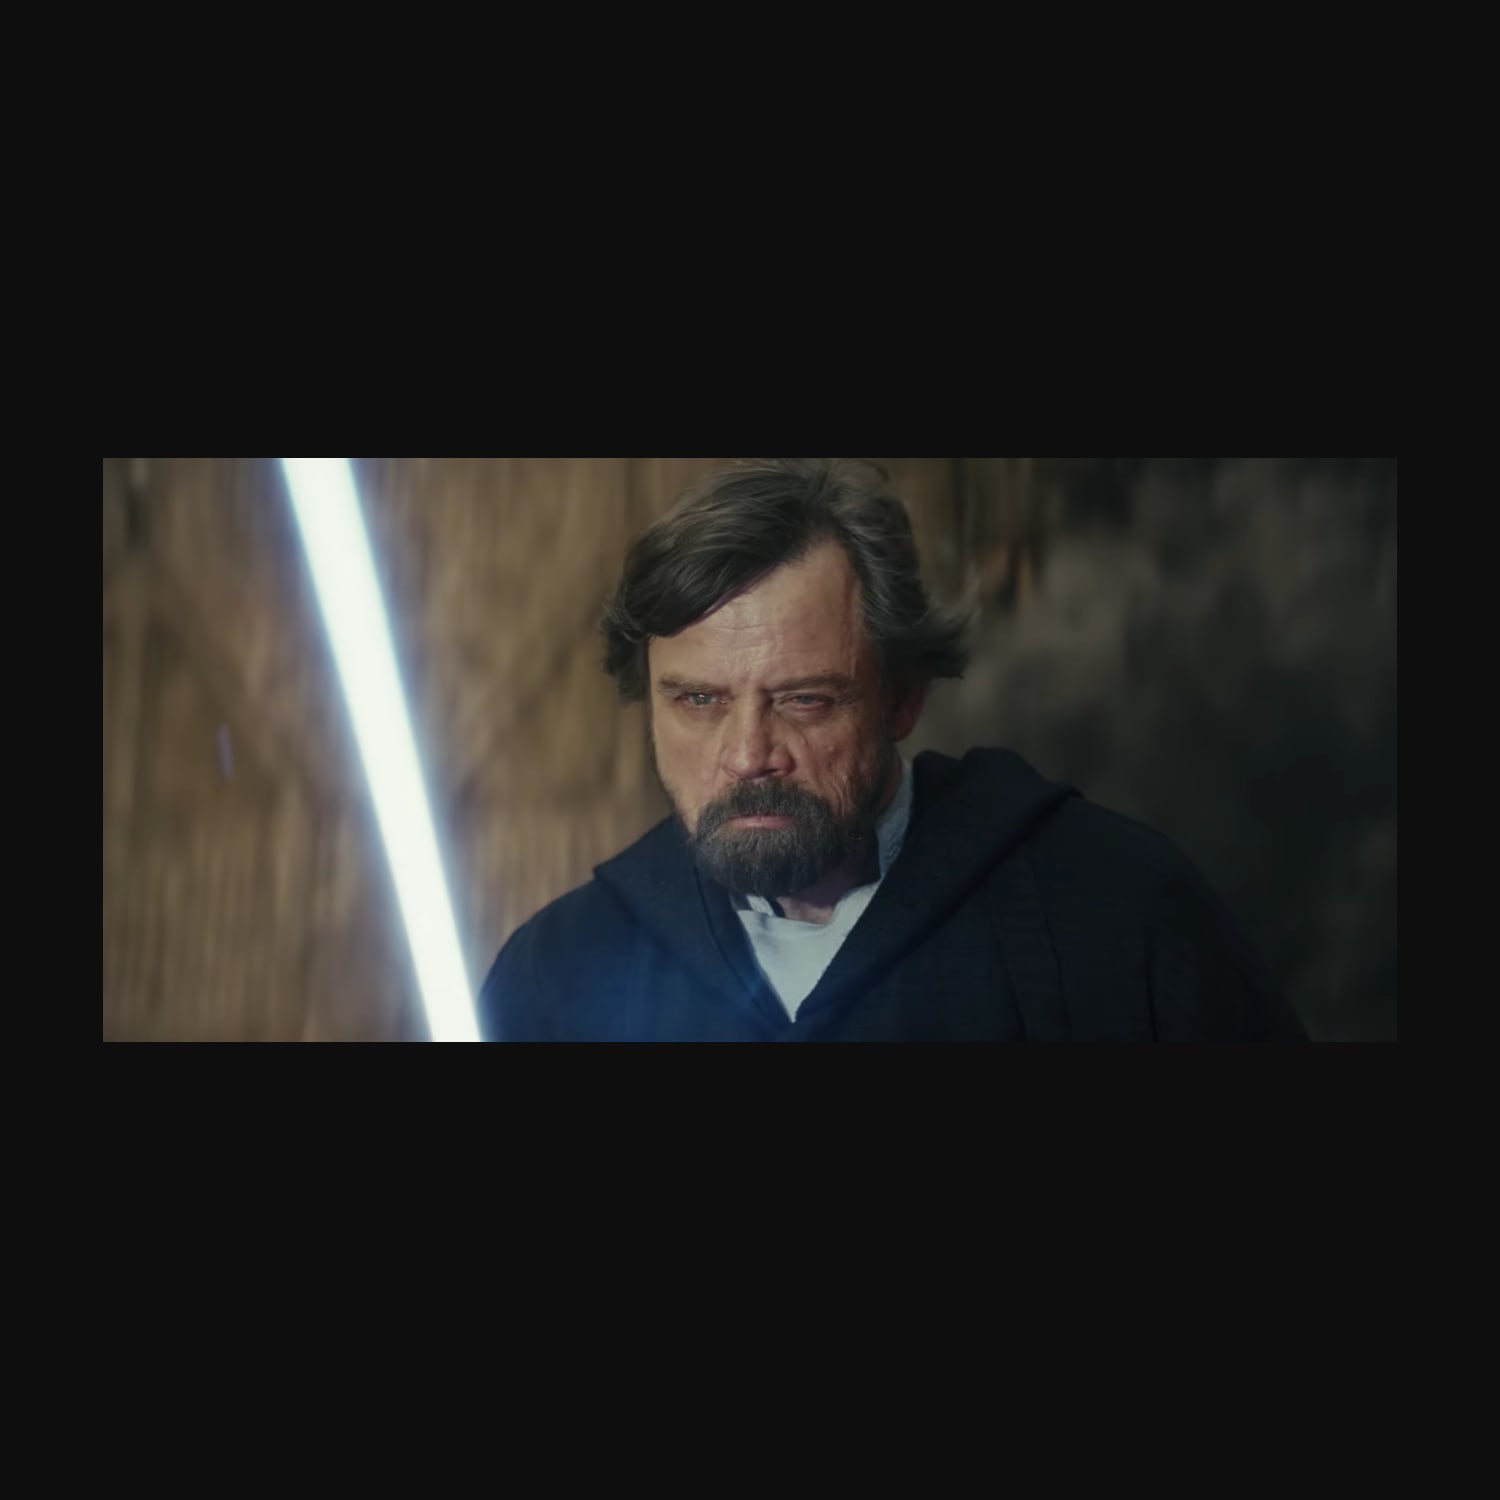 No matter what you think of Luke Skywalker in The Last Jedi, I think we can all agree Mark Hamill did a splendid job in the film